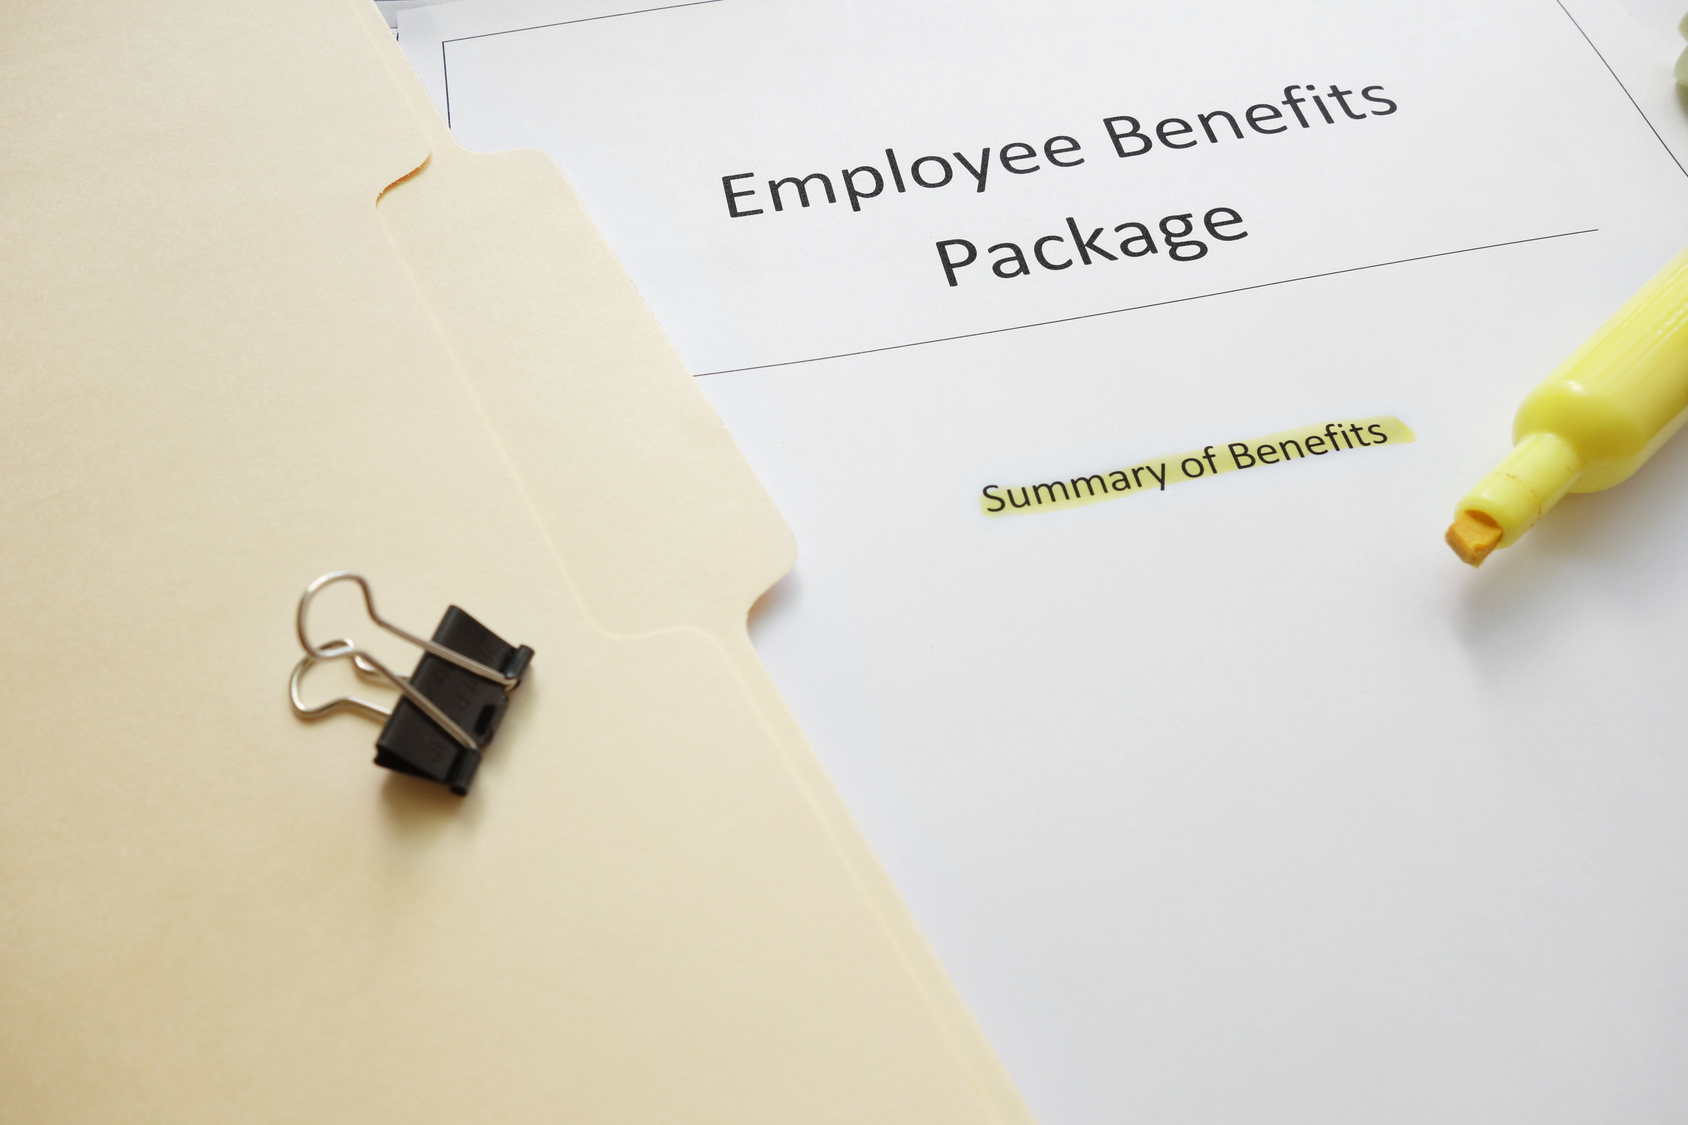 The Top 9 Severance Package Landmines for Employees, Part 2